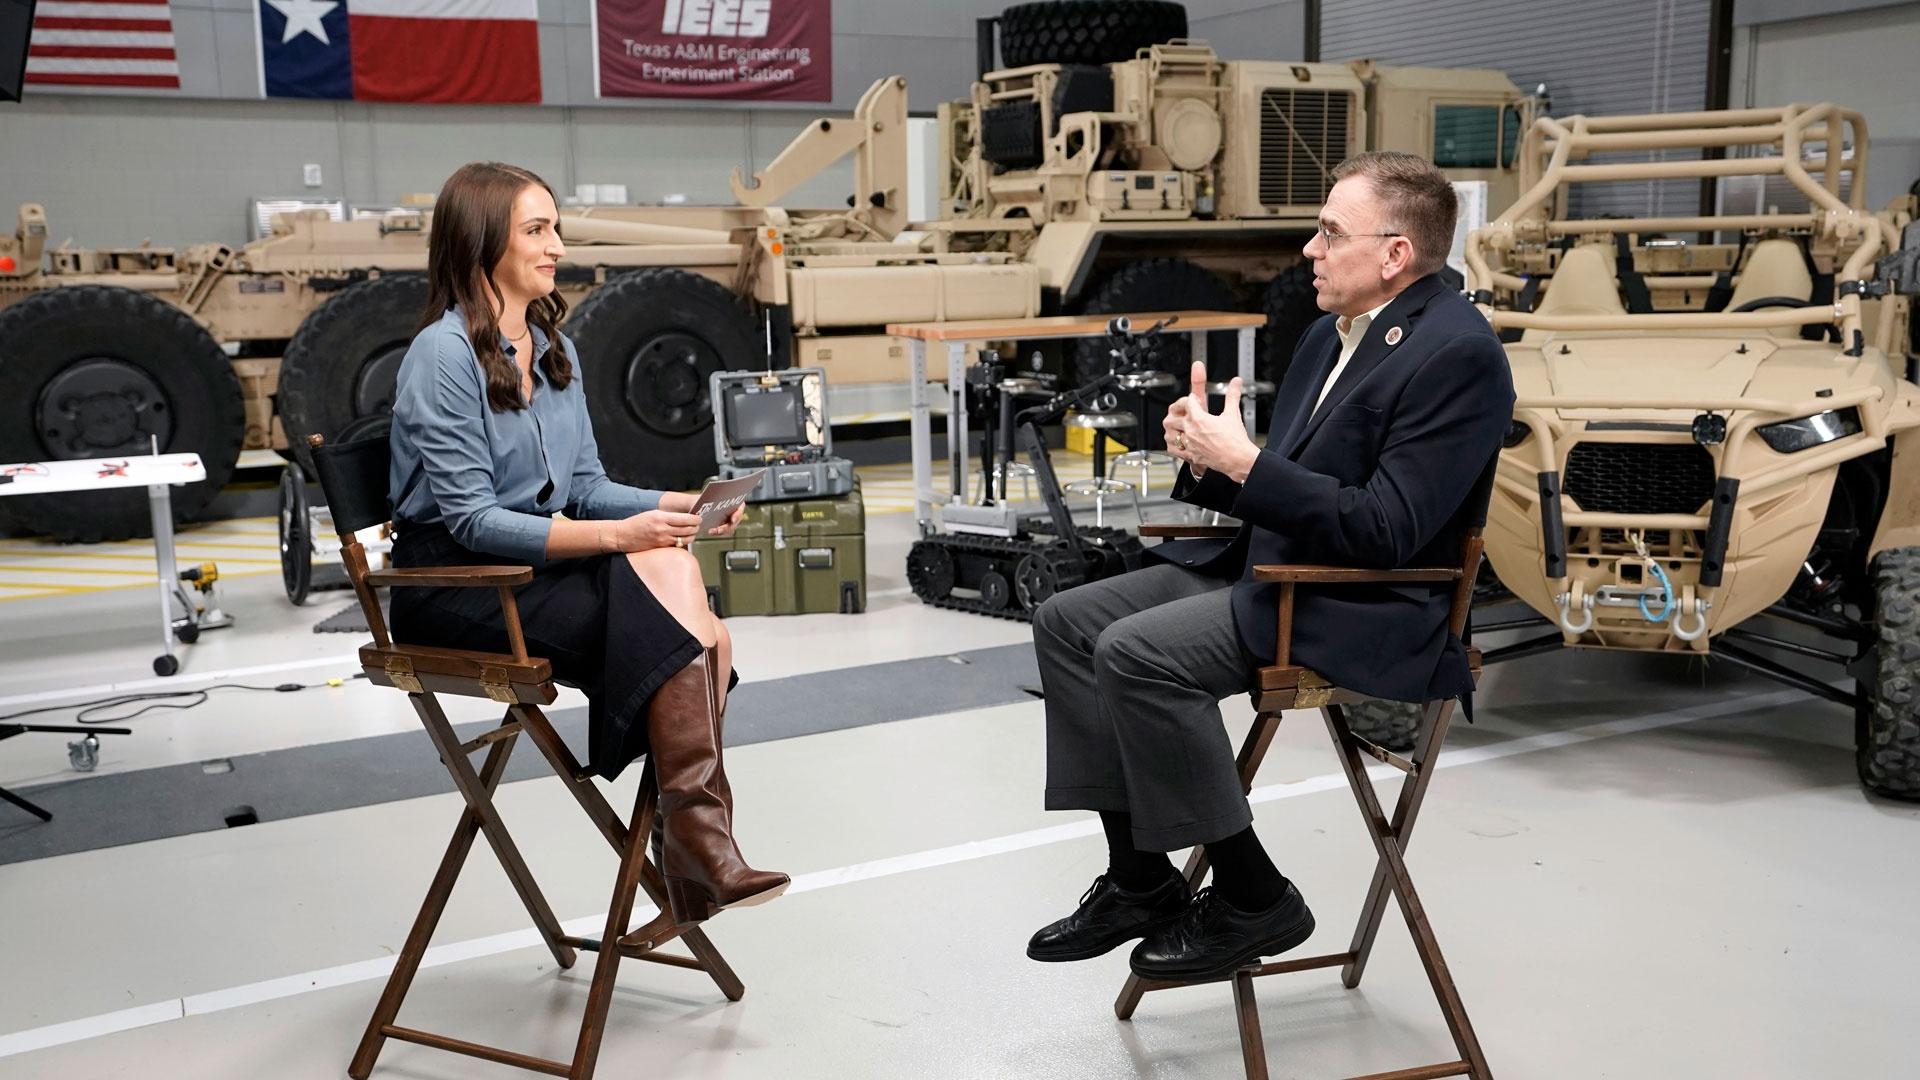 Chelsea Reber and Tim Green discuss the Bush Combat Development Complex, as featured on Season 2 of "Texas A&M Today."